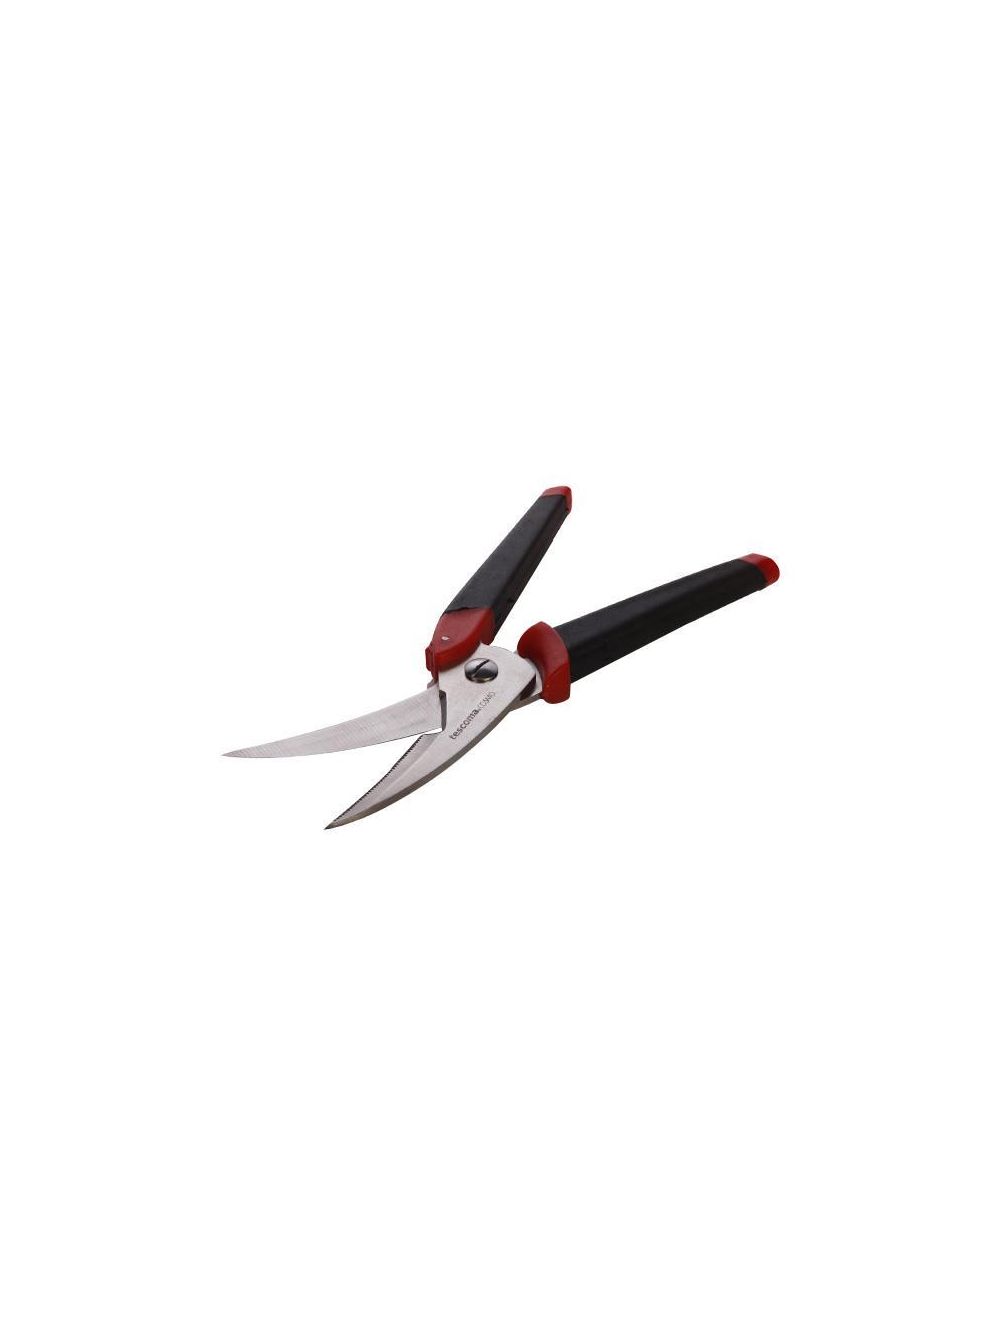 Tescoma Poultry Shears 25 cm - Assorted Colour